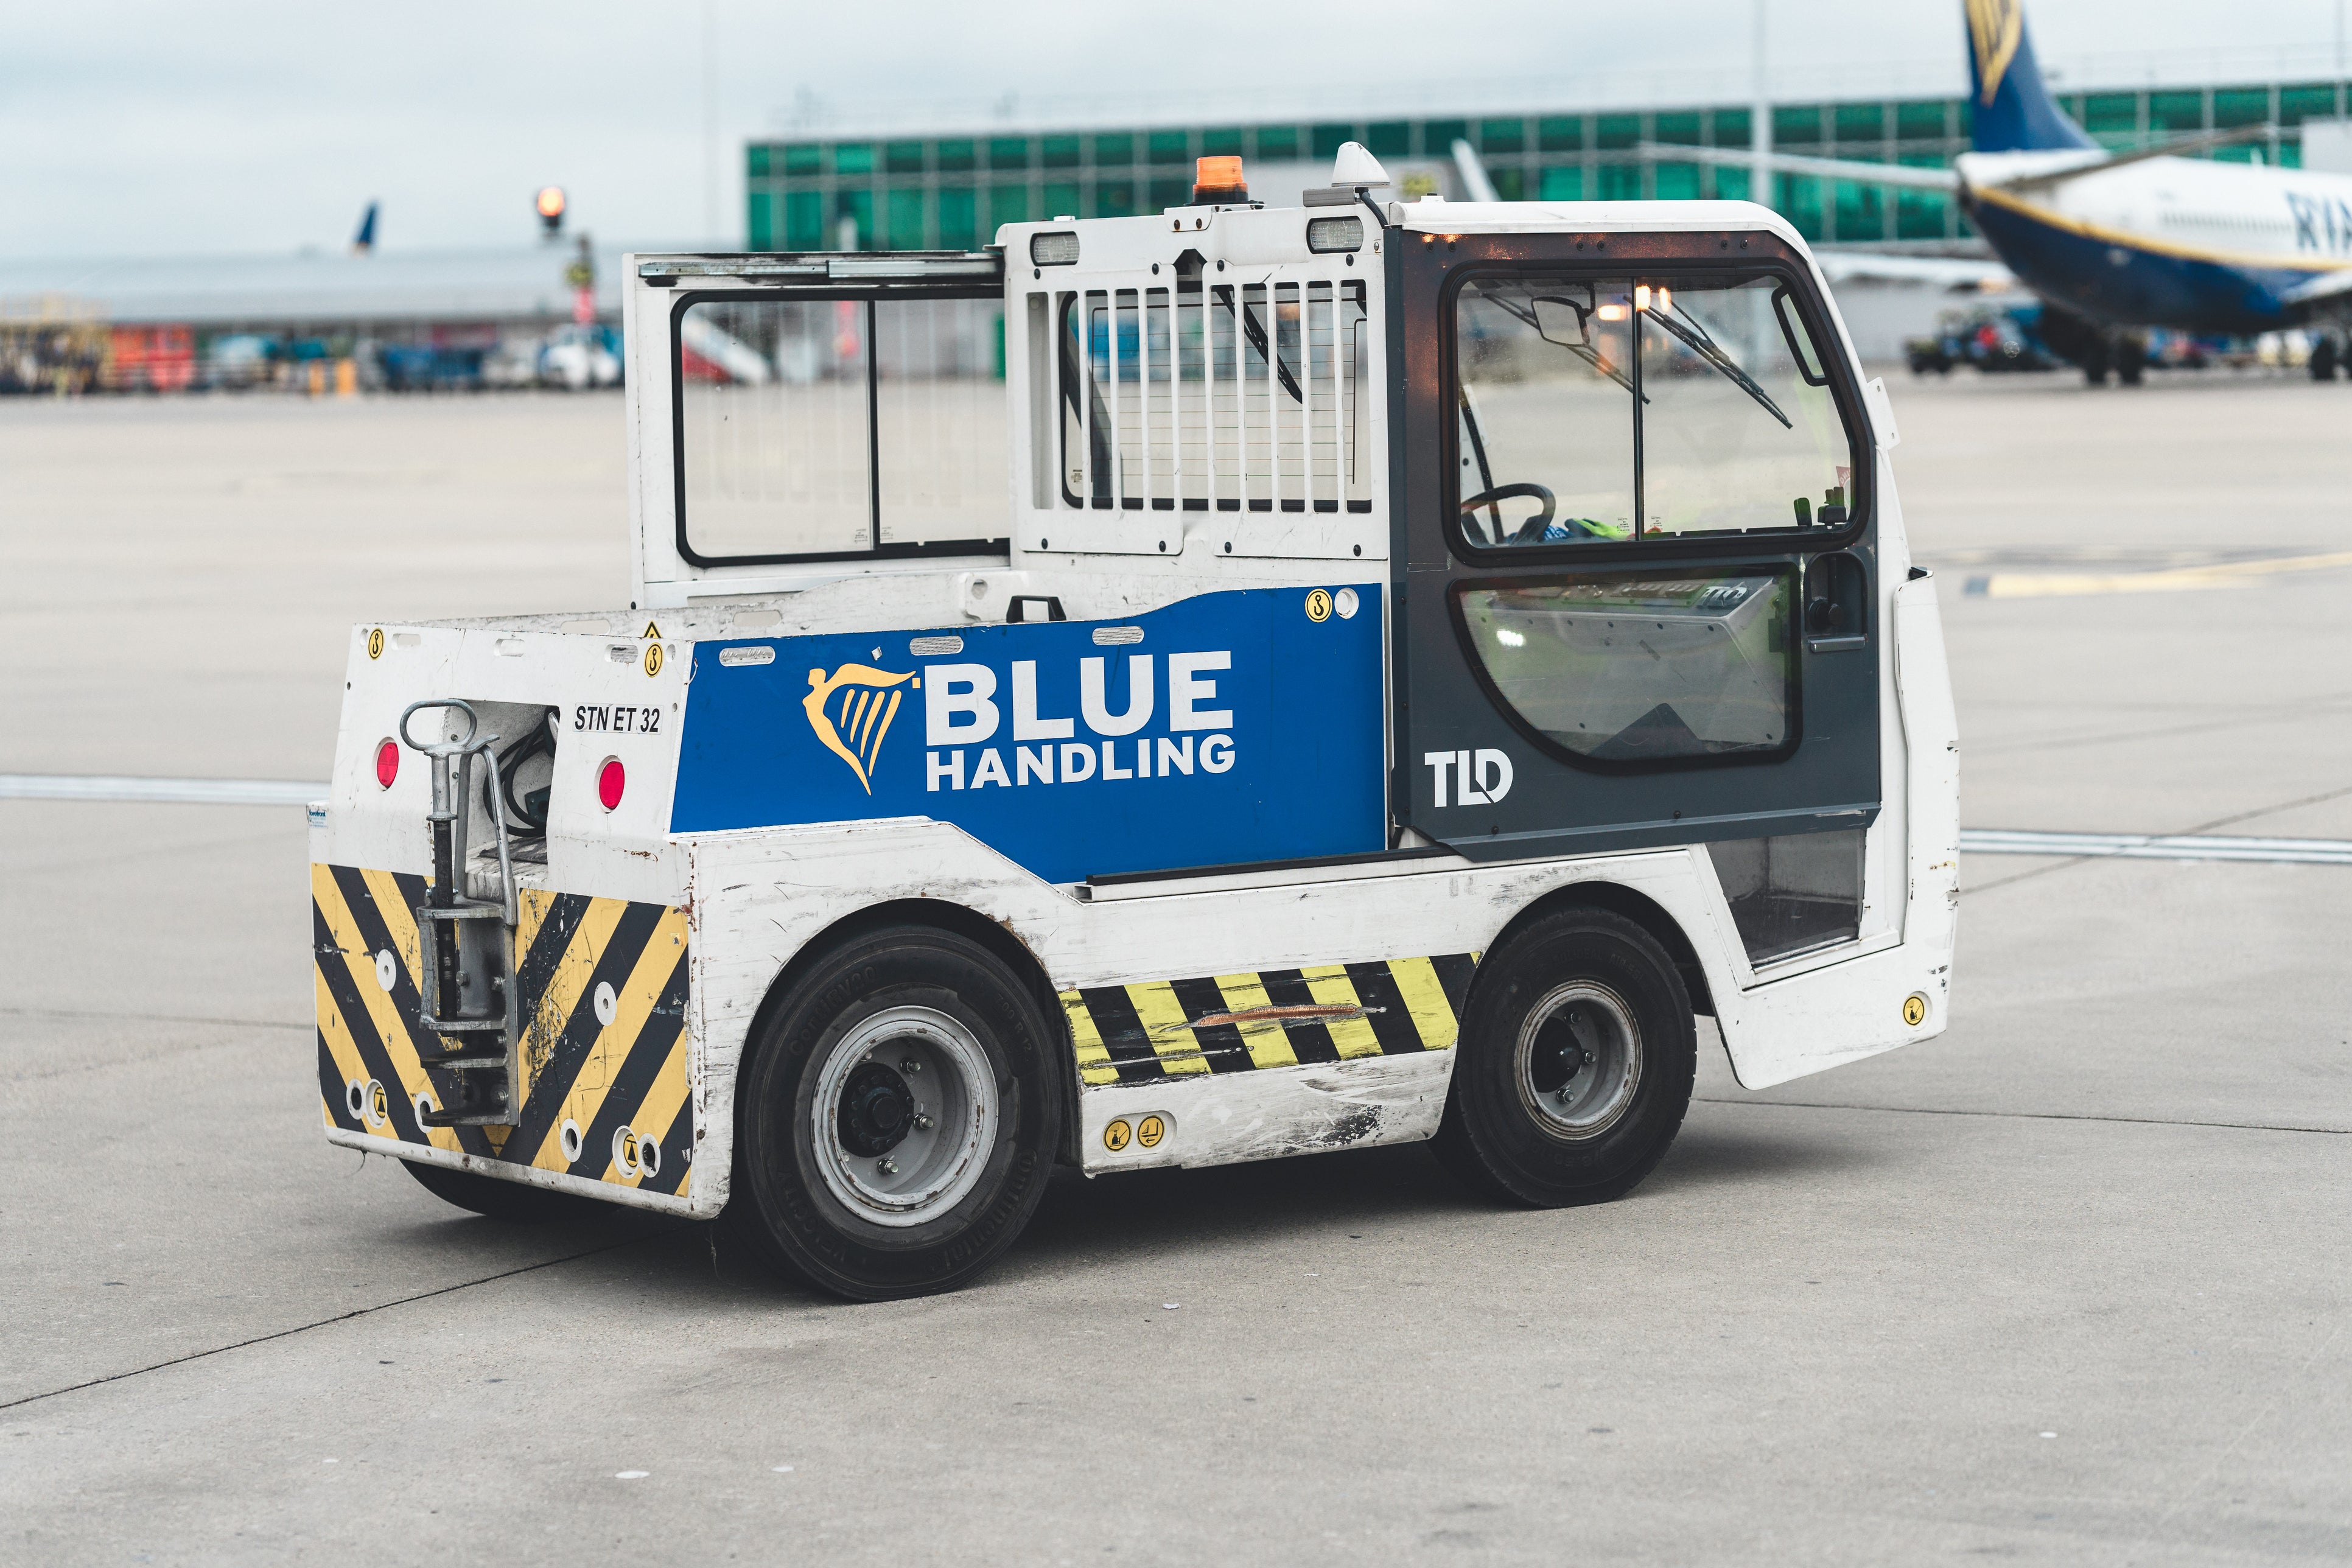 Stansted’s ABM Blue Handling investigated the incident